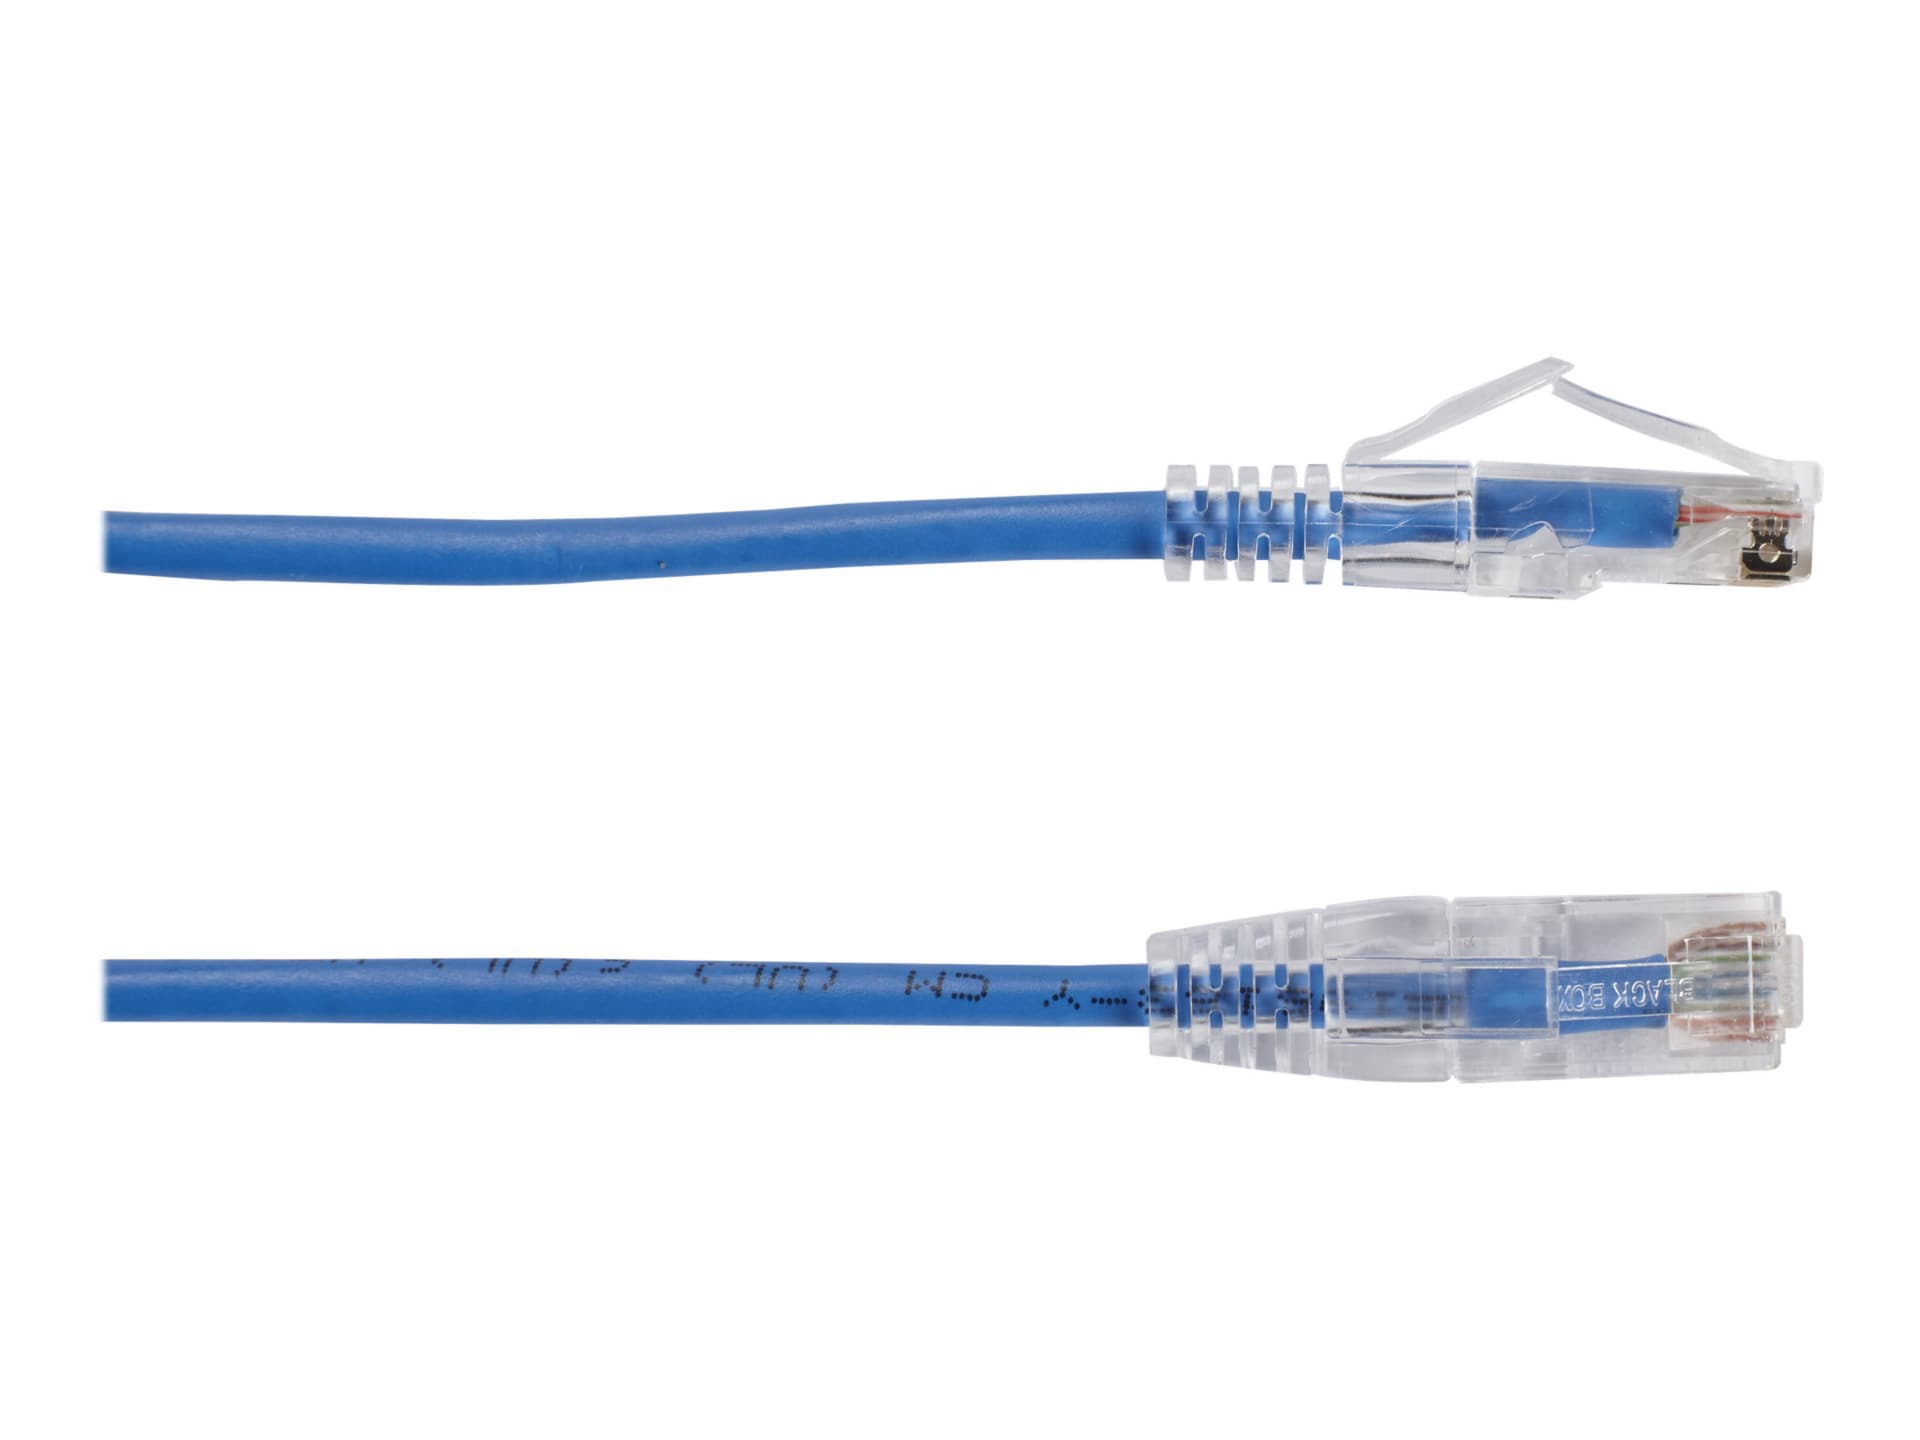 Black Box 1ft Slim-Net CAT6A Blue 28AWG 250Mhz UTP Snagless Patch Cable, 1'